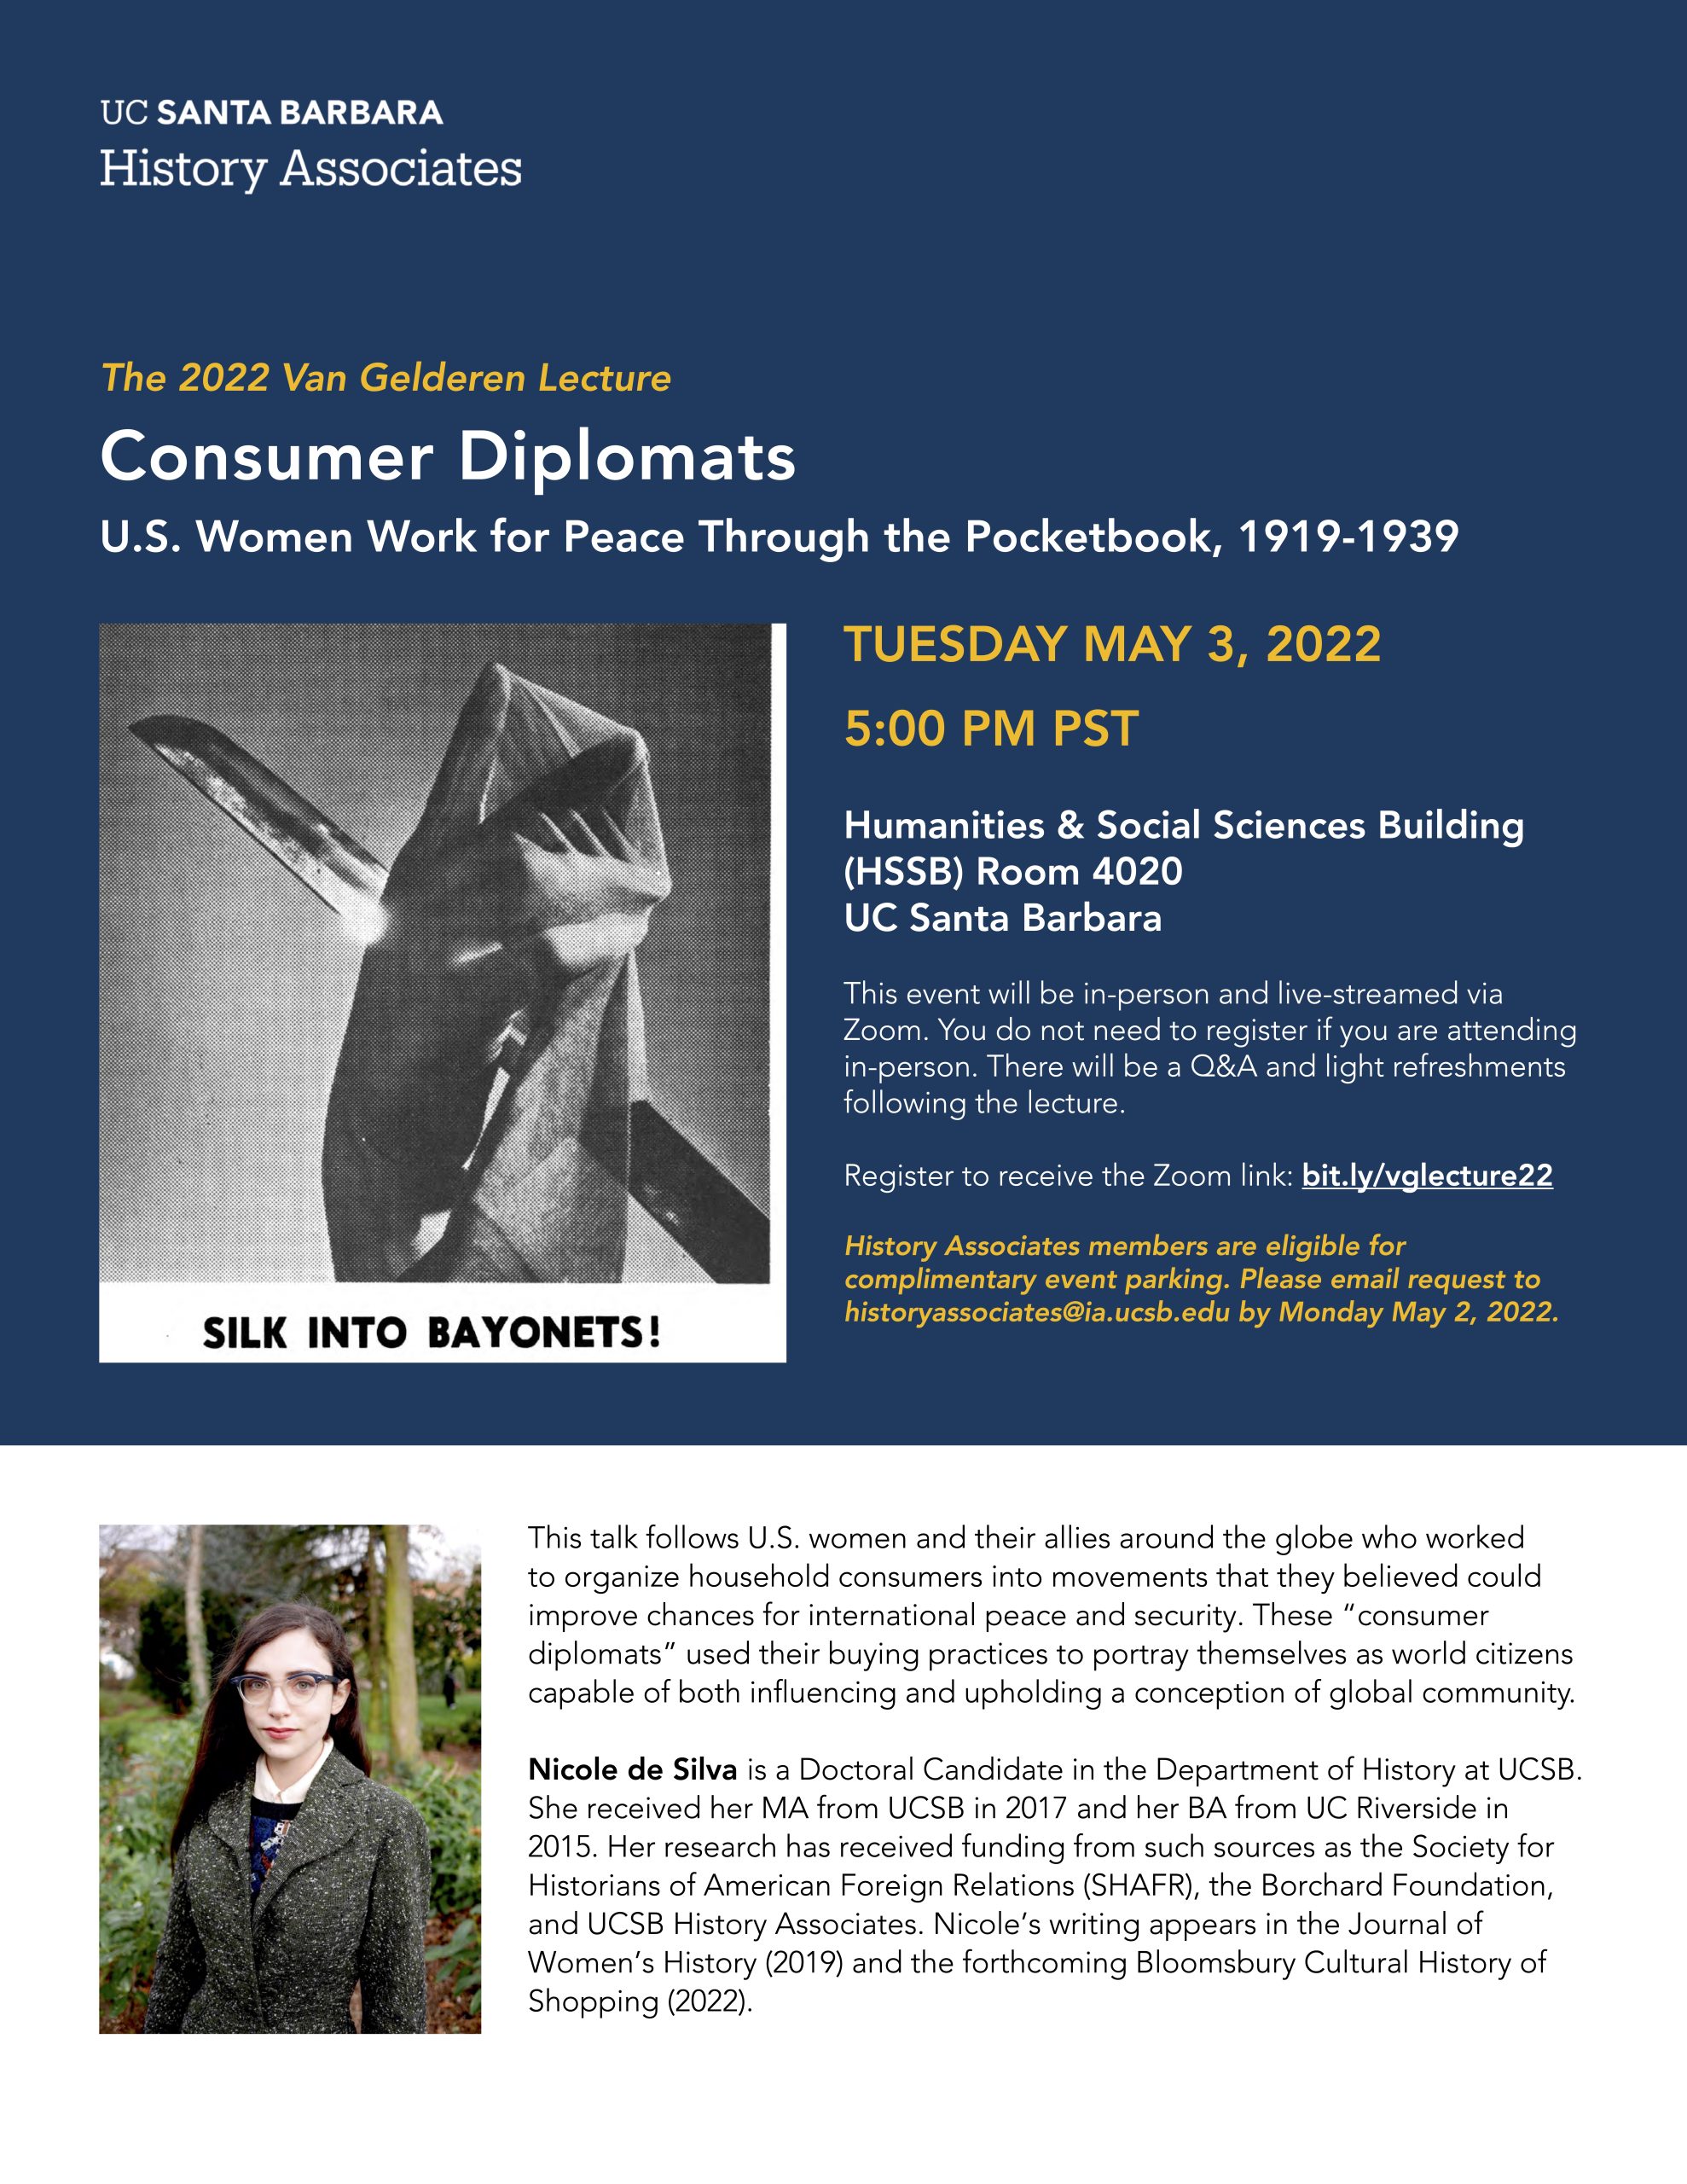 Flyer for "The 2022 Van Gelderan Lecture, Consumer Diplomats: US Women Work for Peace Through the Pocketbook, 1919-1939" with Nicole de Silva on May 3, 2022 at 5PM in 4020 HSSB